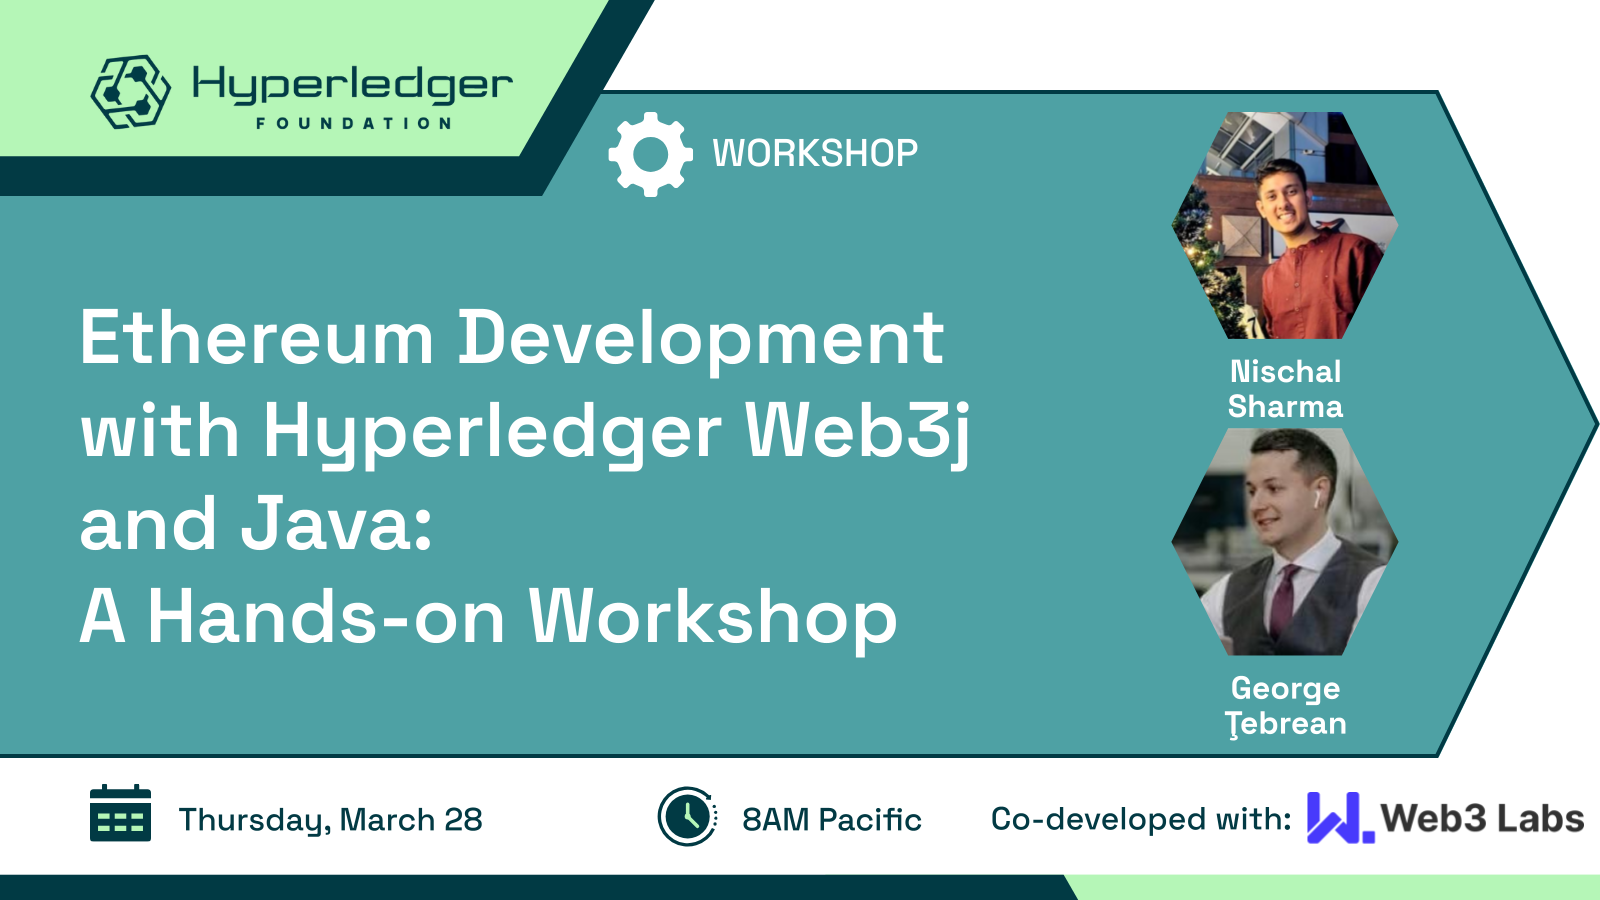 Empowering Blockchain Development with Web3j: A Hands-on Workshop featured image